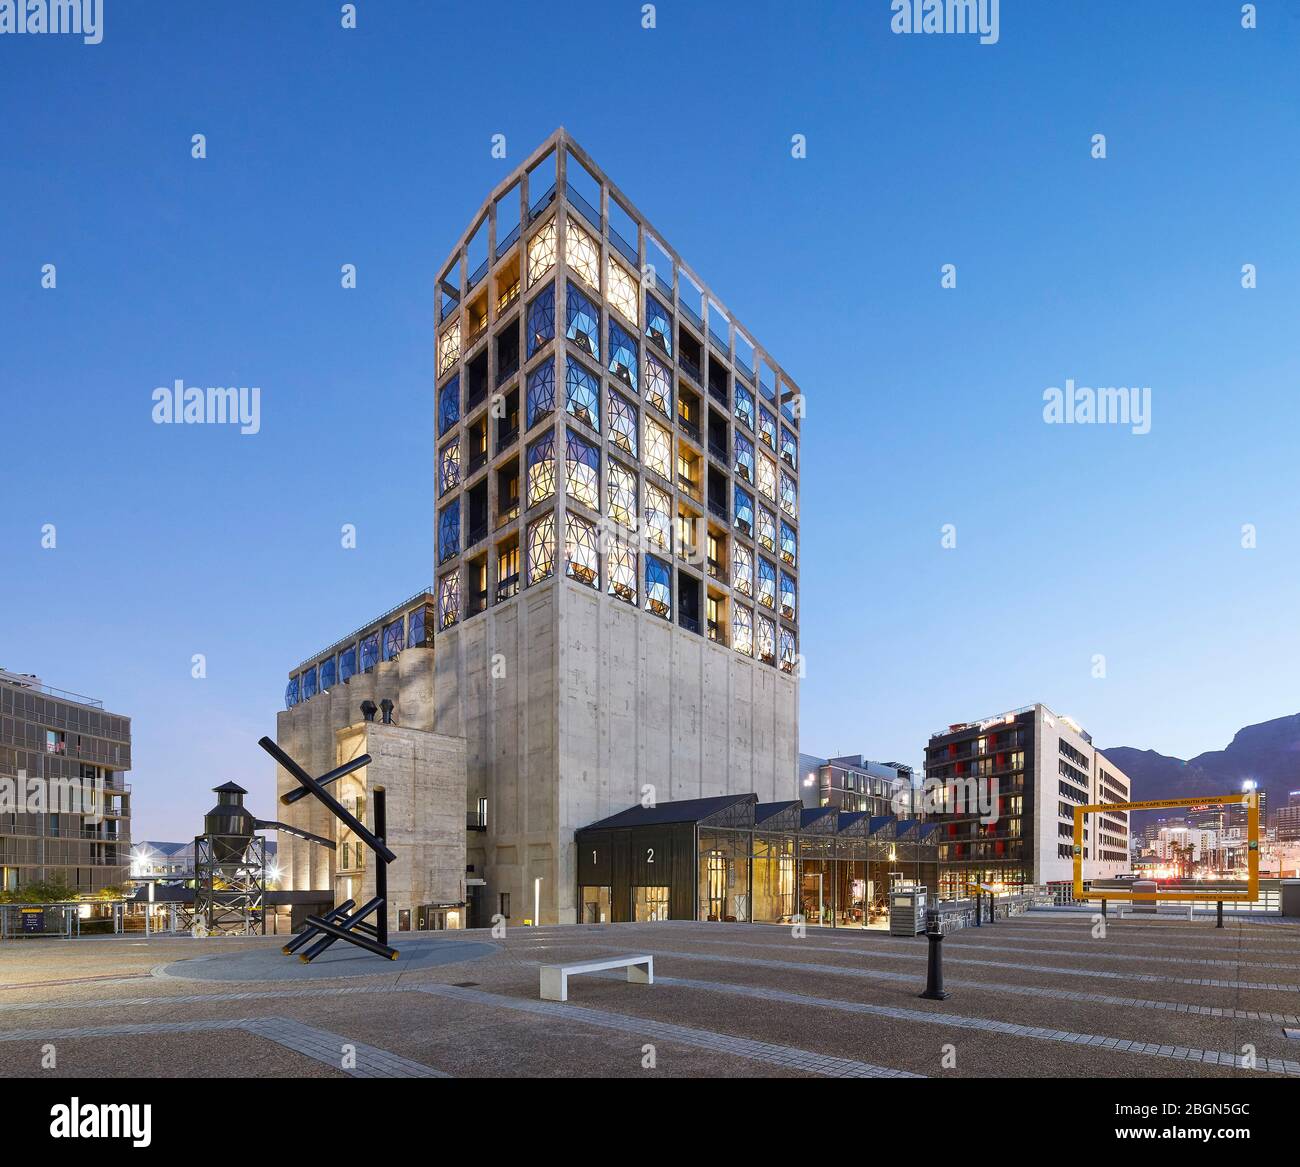 Exterior facade across plaza with canopied Track Shed forecourt. Zeitz MOCAA, Cape Town, South Africa. Architect: Heatherwick Studio, 2017. Stock Photo